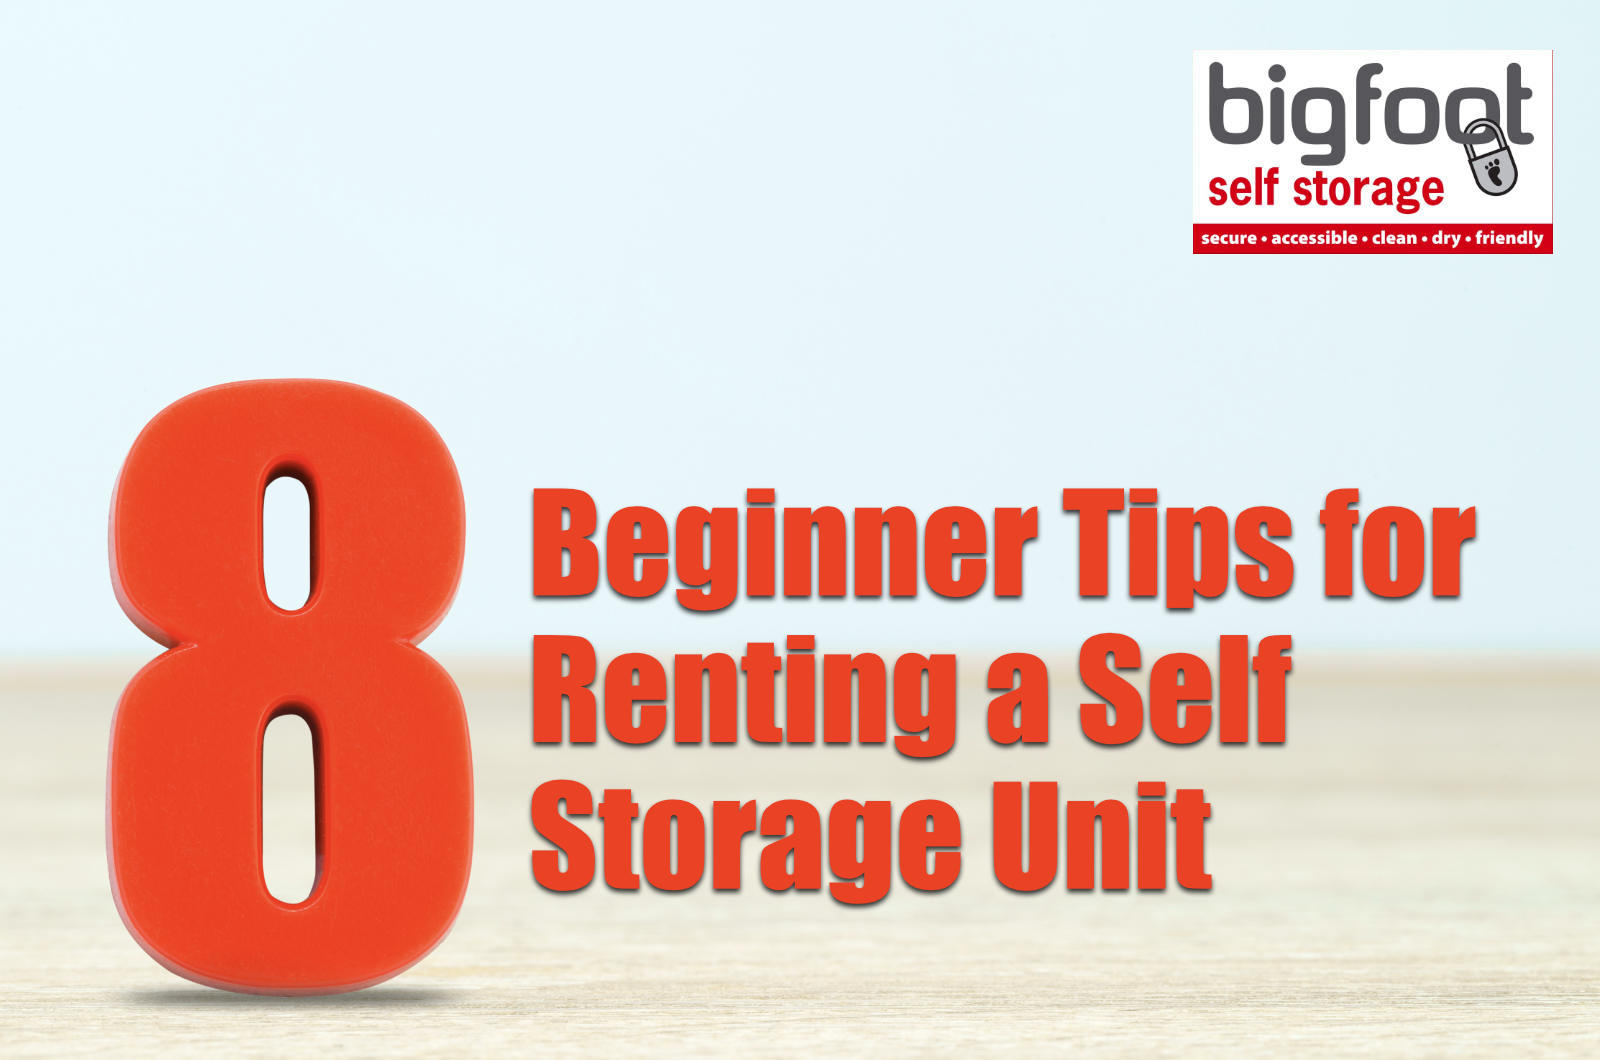 Beginner tips for renting a self-storage unit